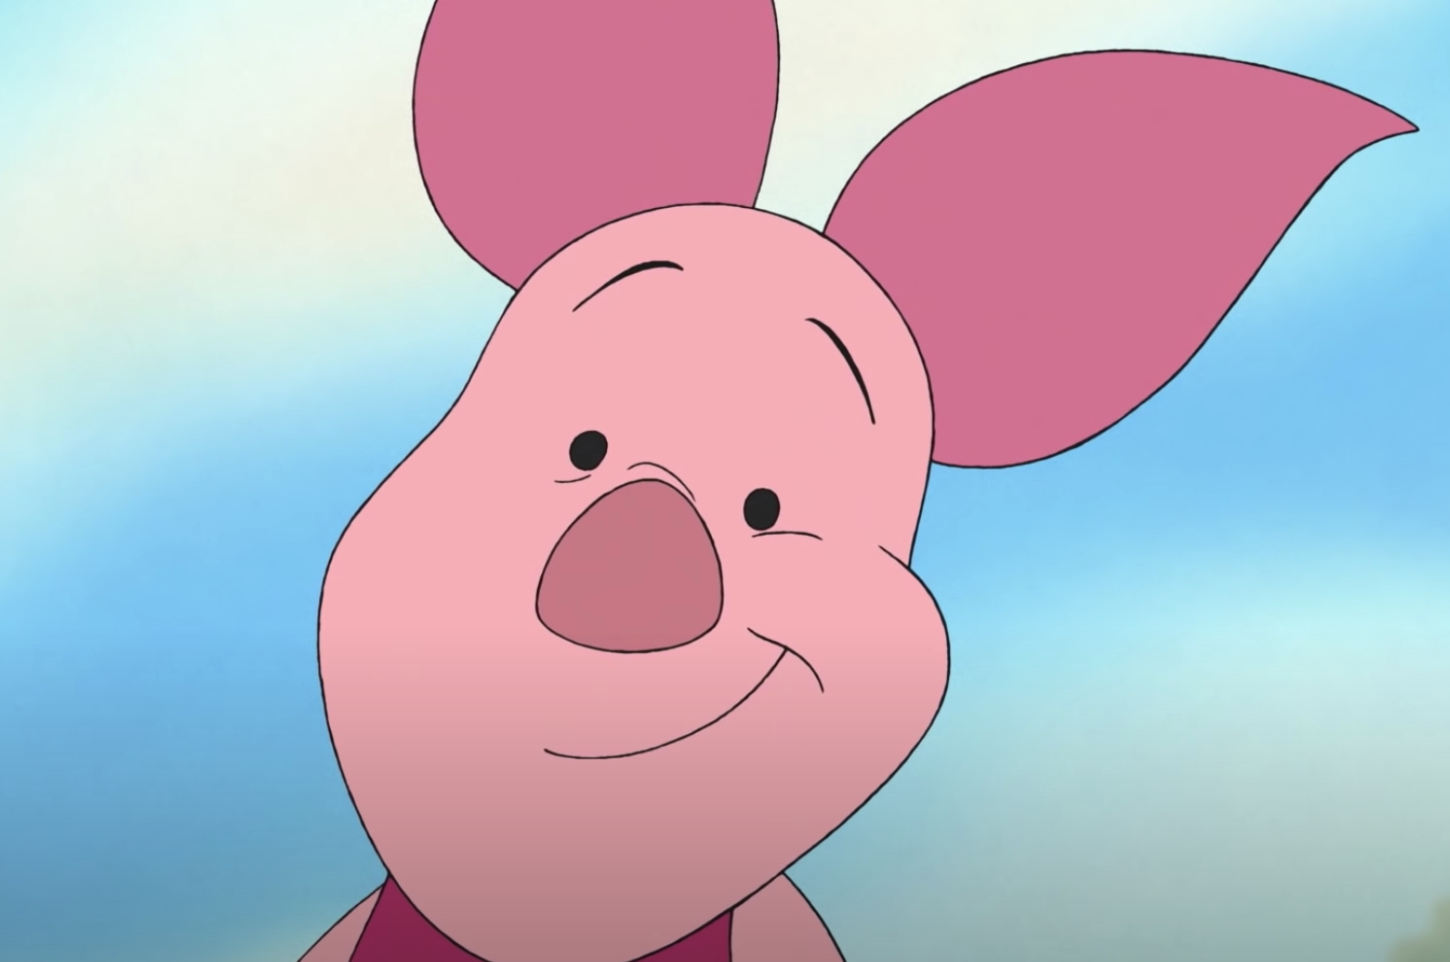 Piglet from &quot;Winnie the Pooh.&quot;